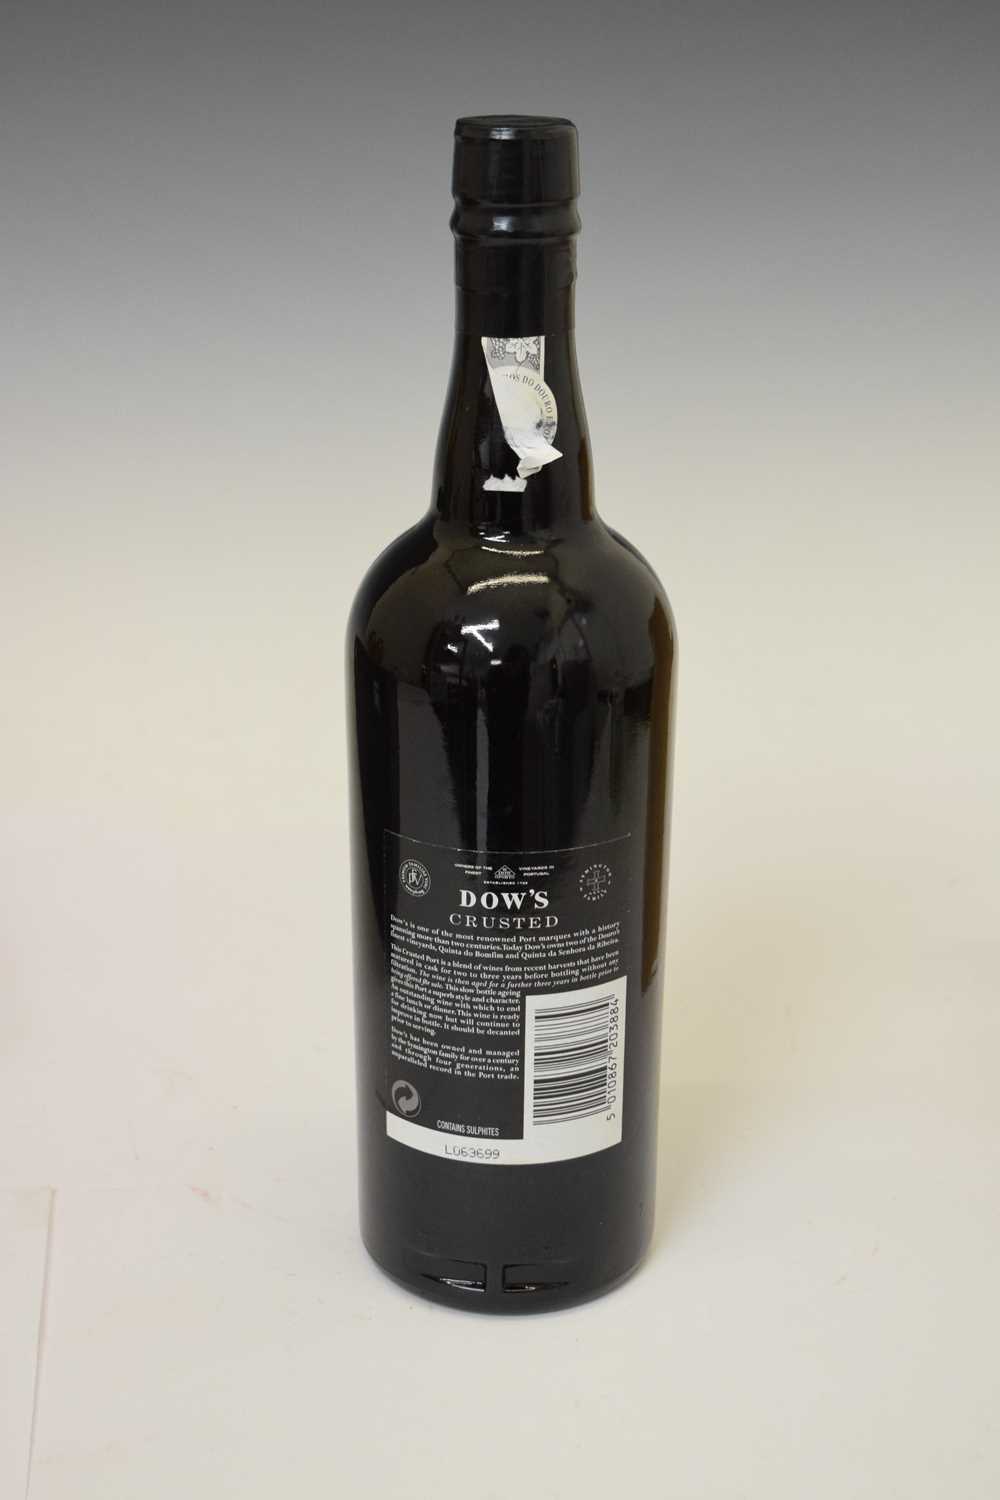 Dow’s crusted port, bottled 2001, 1 bottle, in presentation box - Image 6 of 6